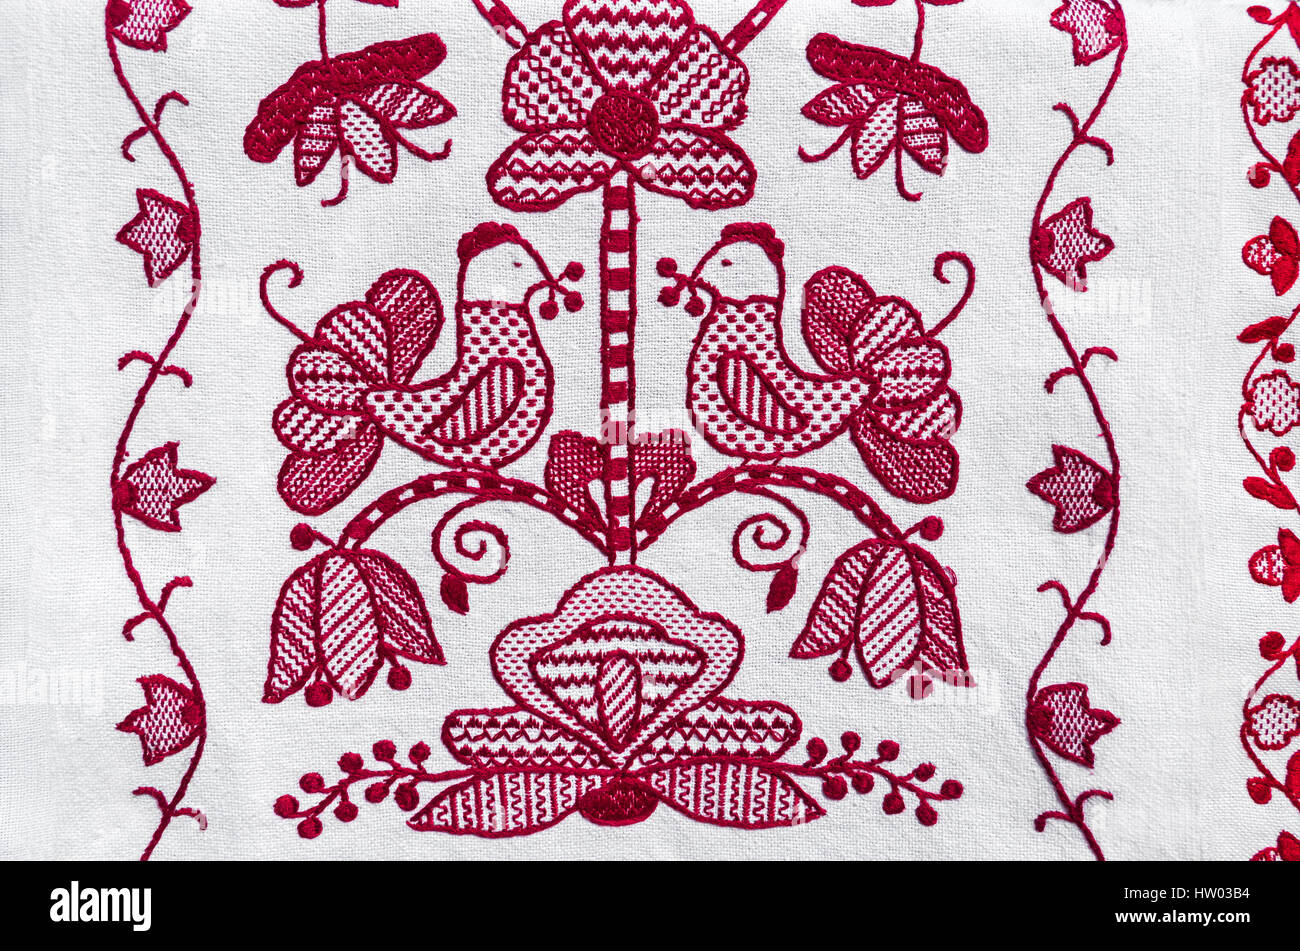 Folk embroidery red thread on white linen canvas. Traditional Ukrainian embroidery motifs Stock Photo